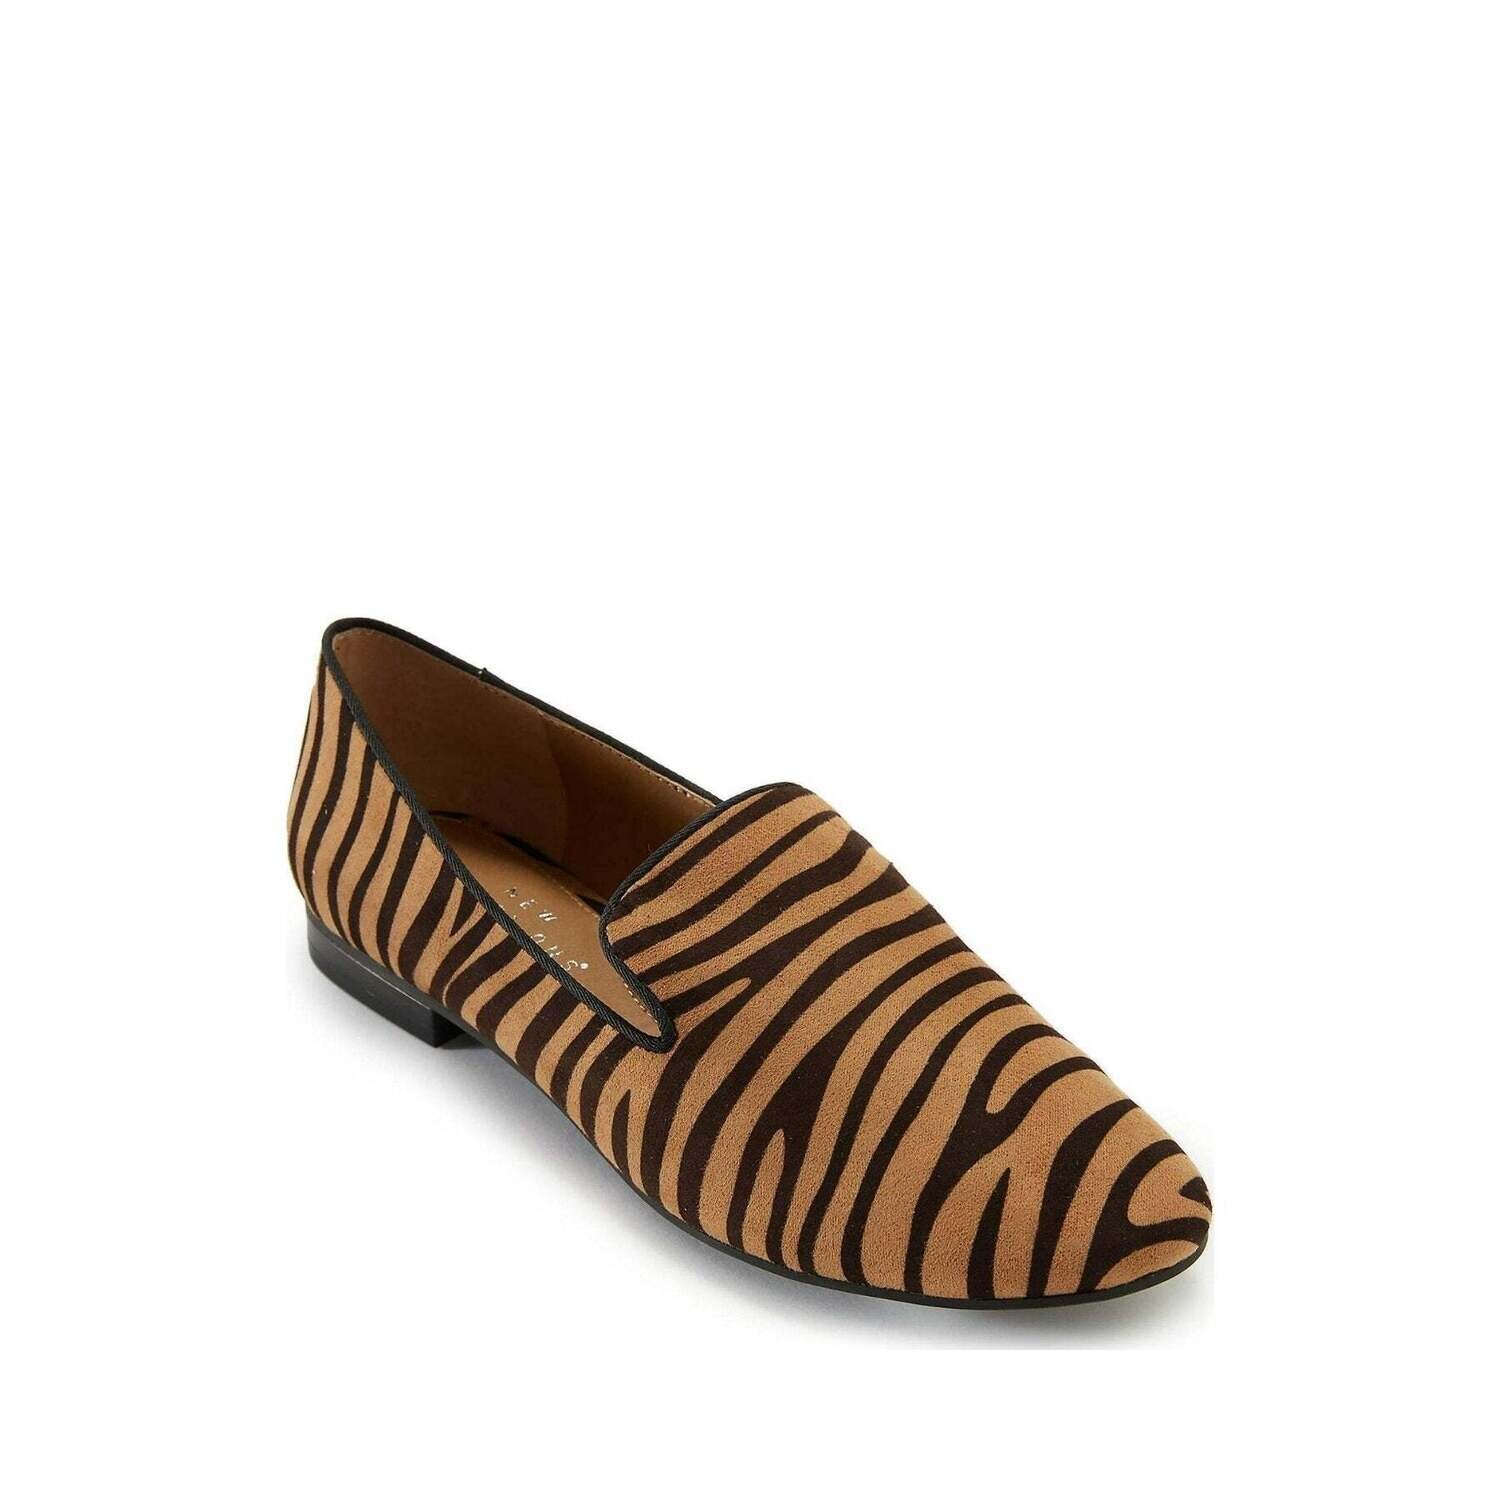 Womens Shoes - Low Heel Tiger Stripe Style / Brown Flats / Size 8.5